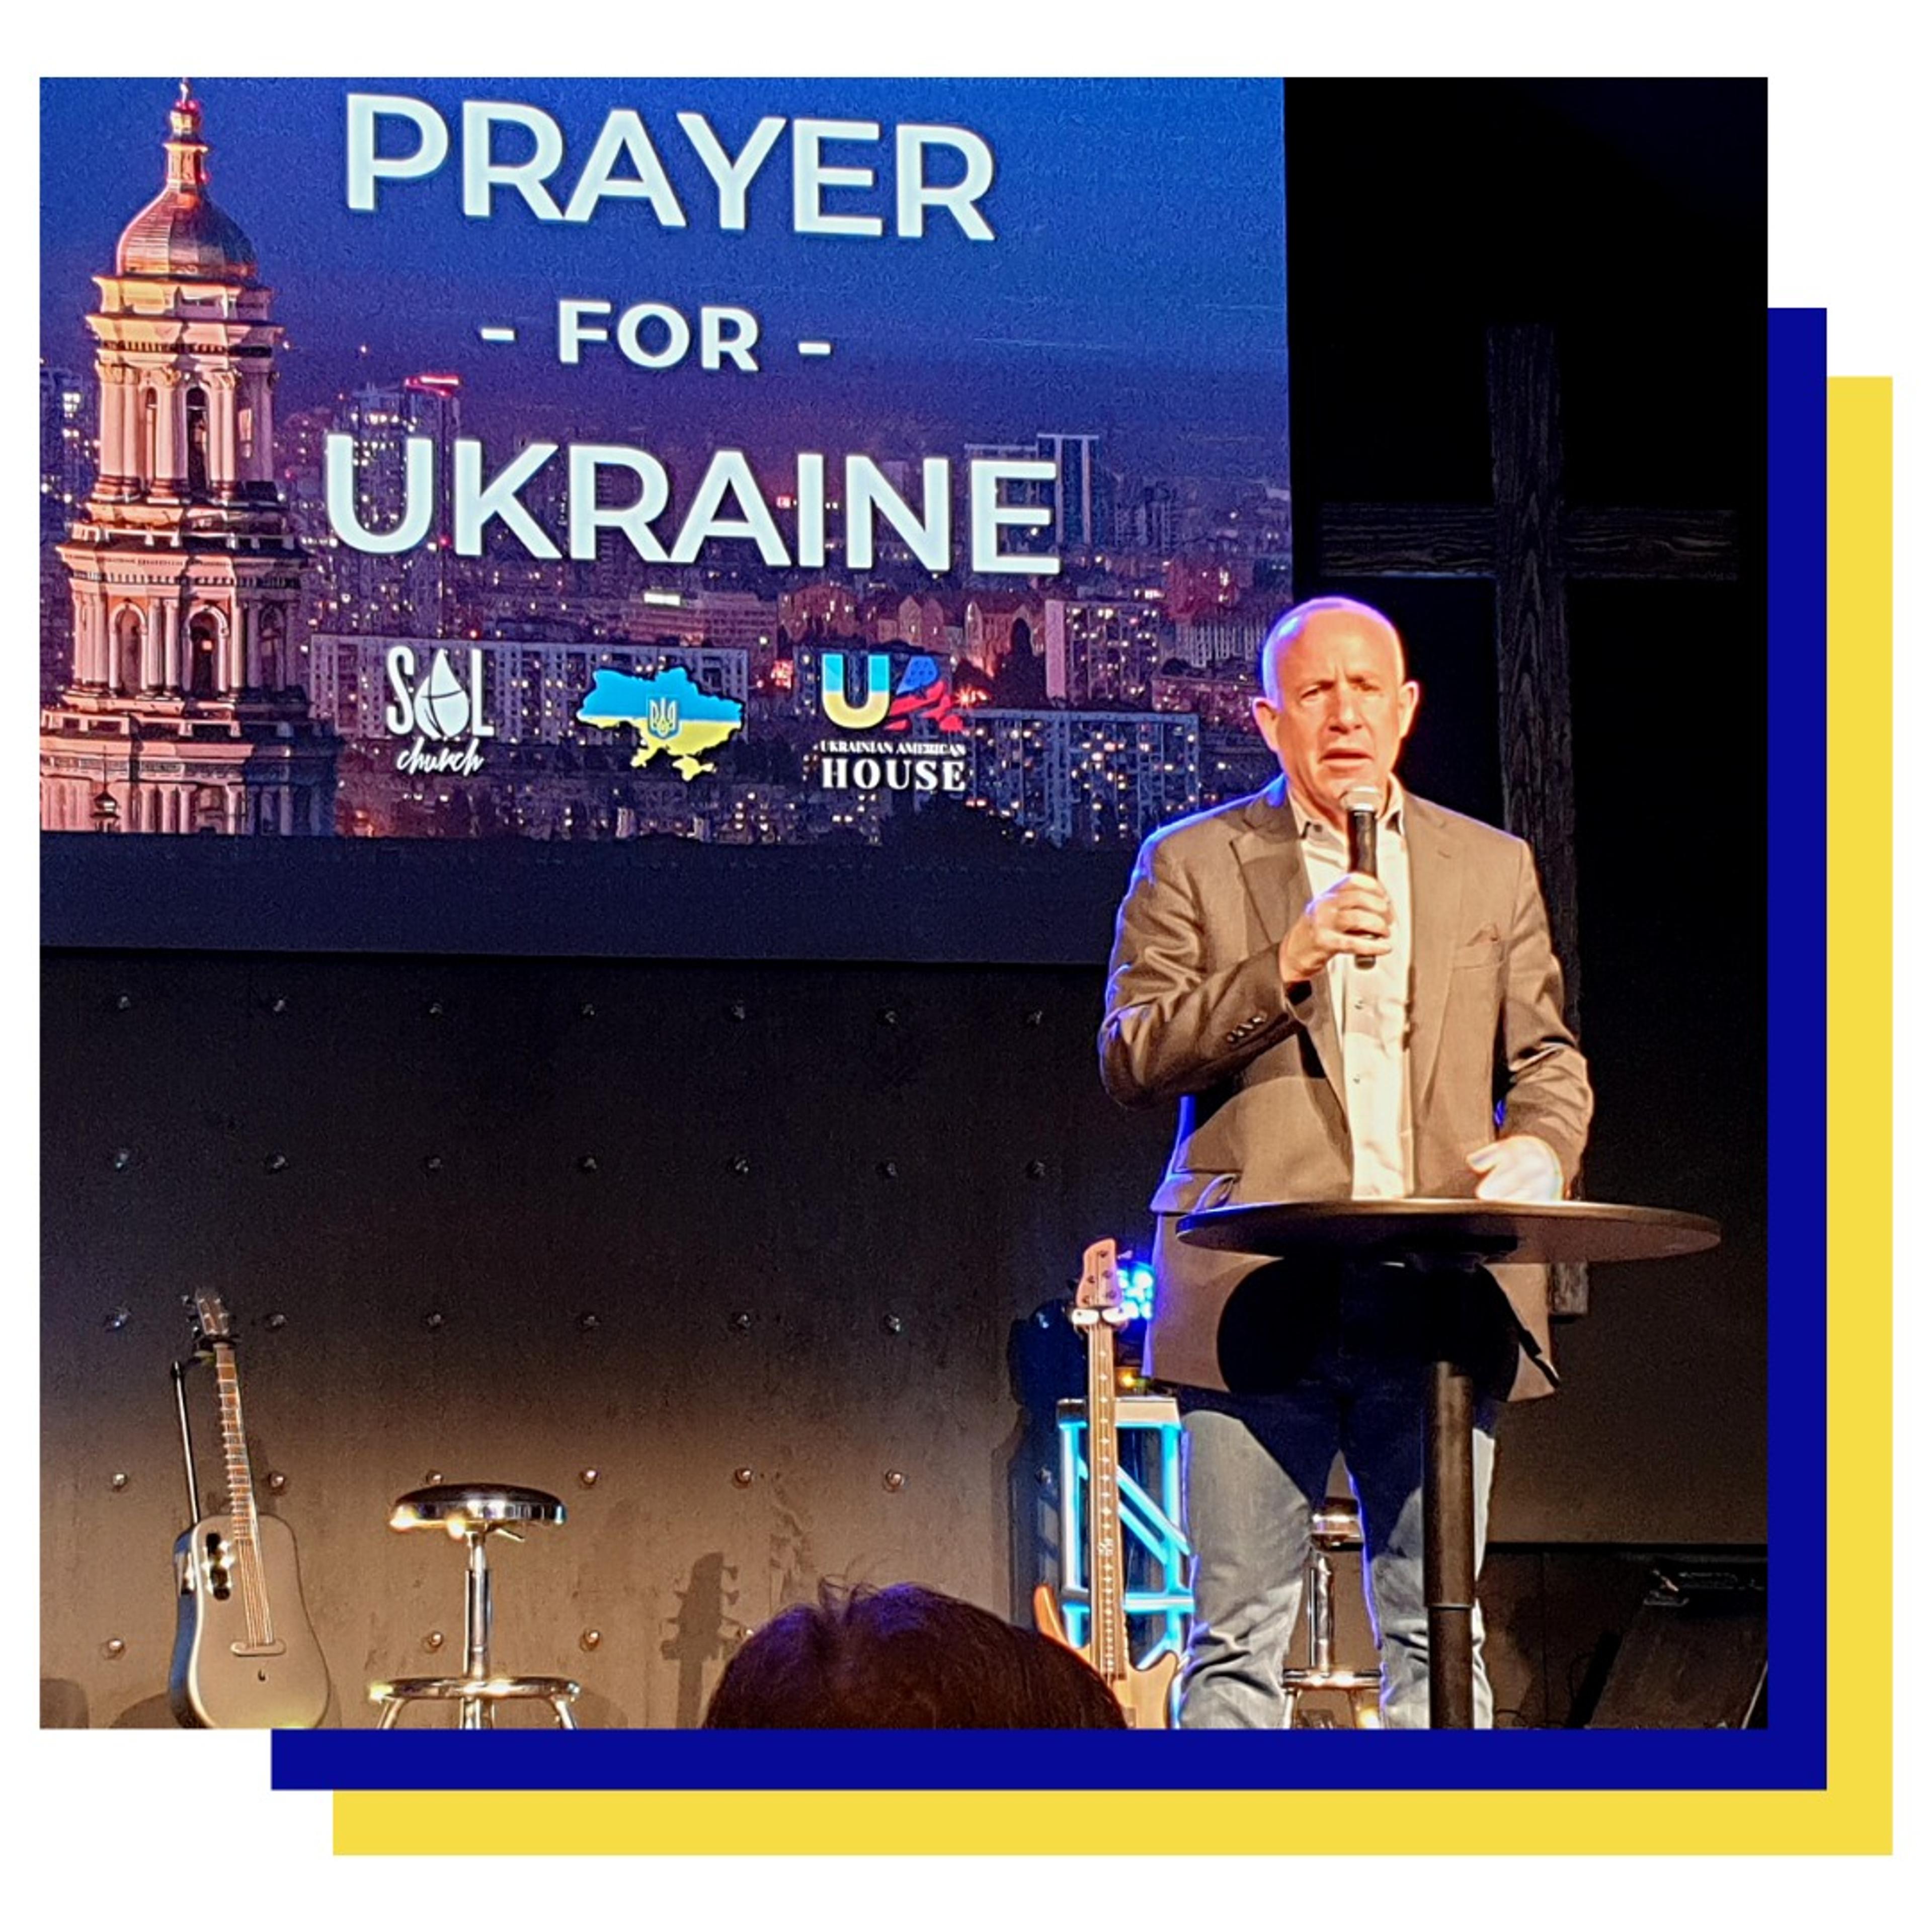 UA House gathered community in prayer for Ukraine after Russia’s invasion